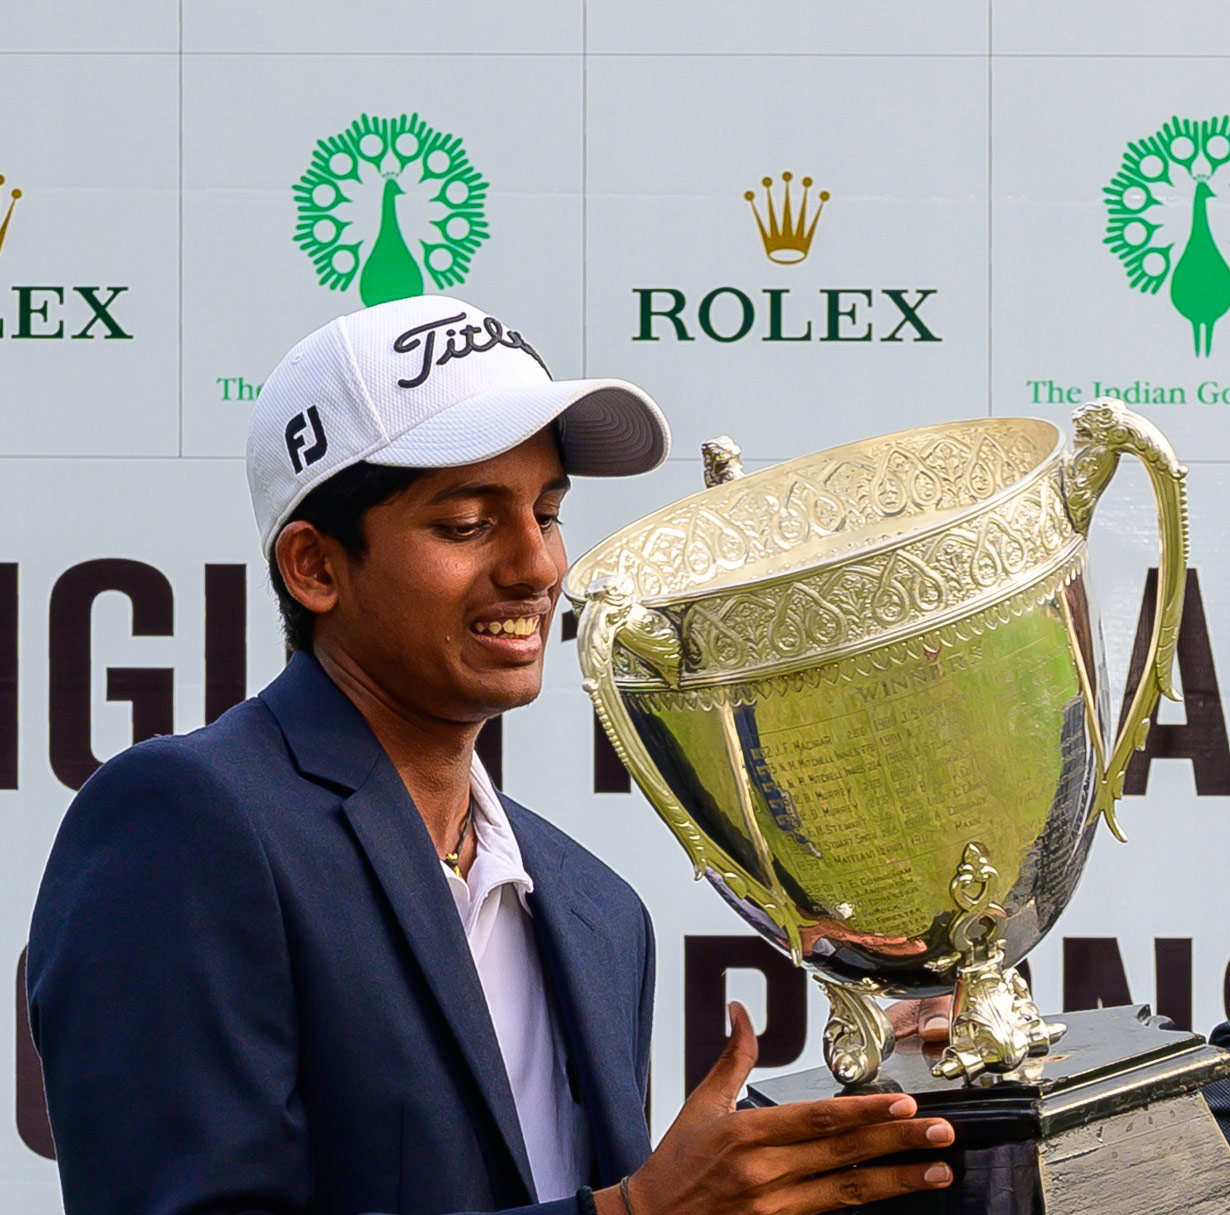 Aryan wins the All India Amateur Golf Championship and creates history by being the first player in 119 years